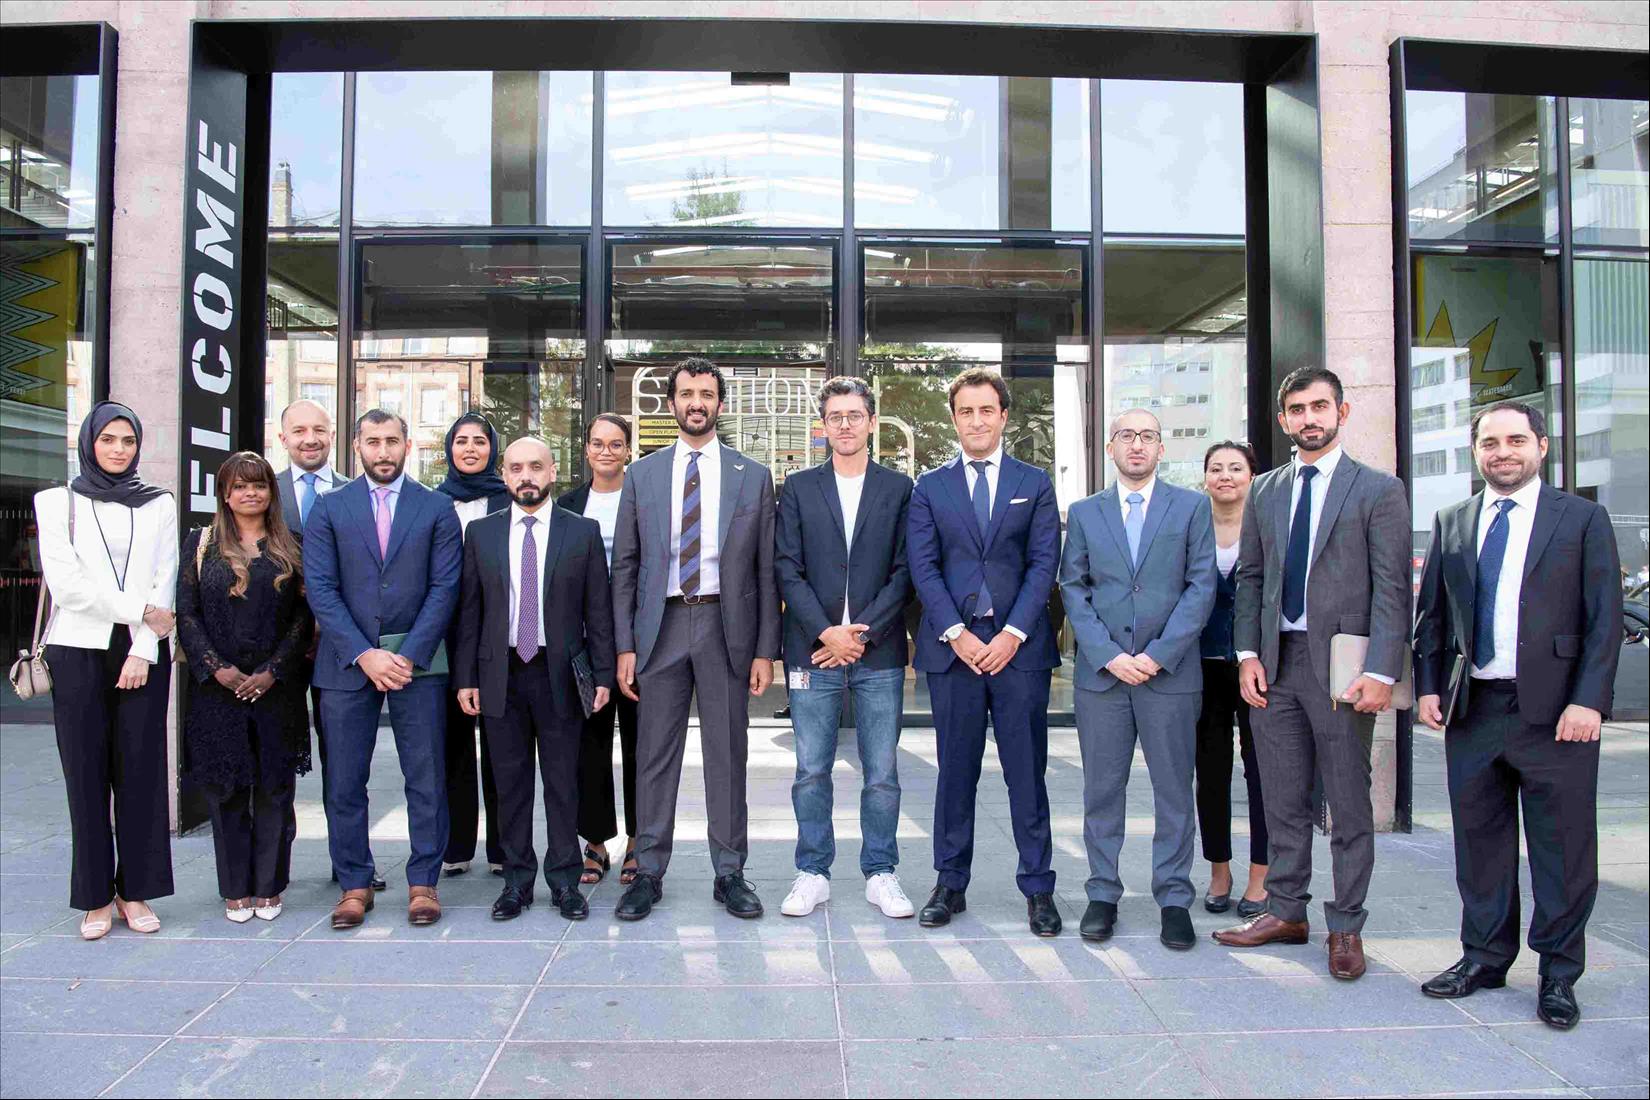 Minister Of Economy Visits 'Station F' Startup Incubator, Airbus Innovation Center & First Abu Dhabi Bank In France